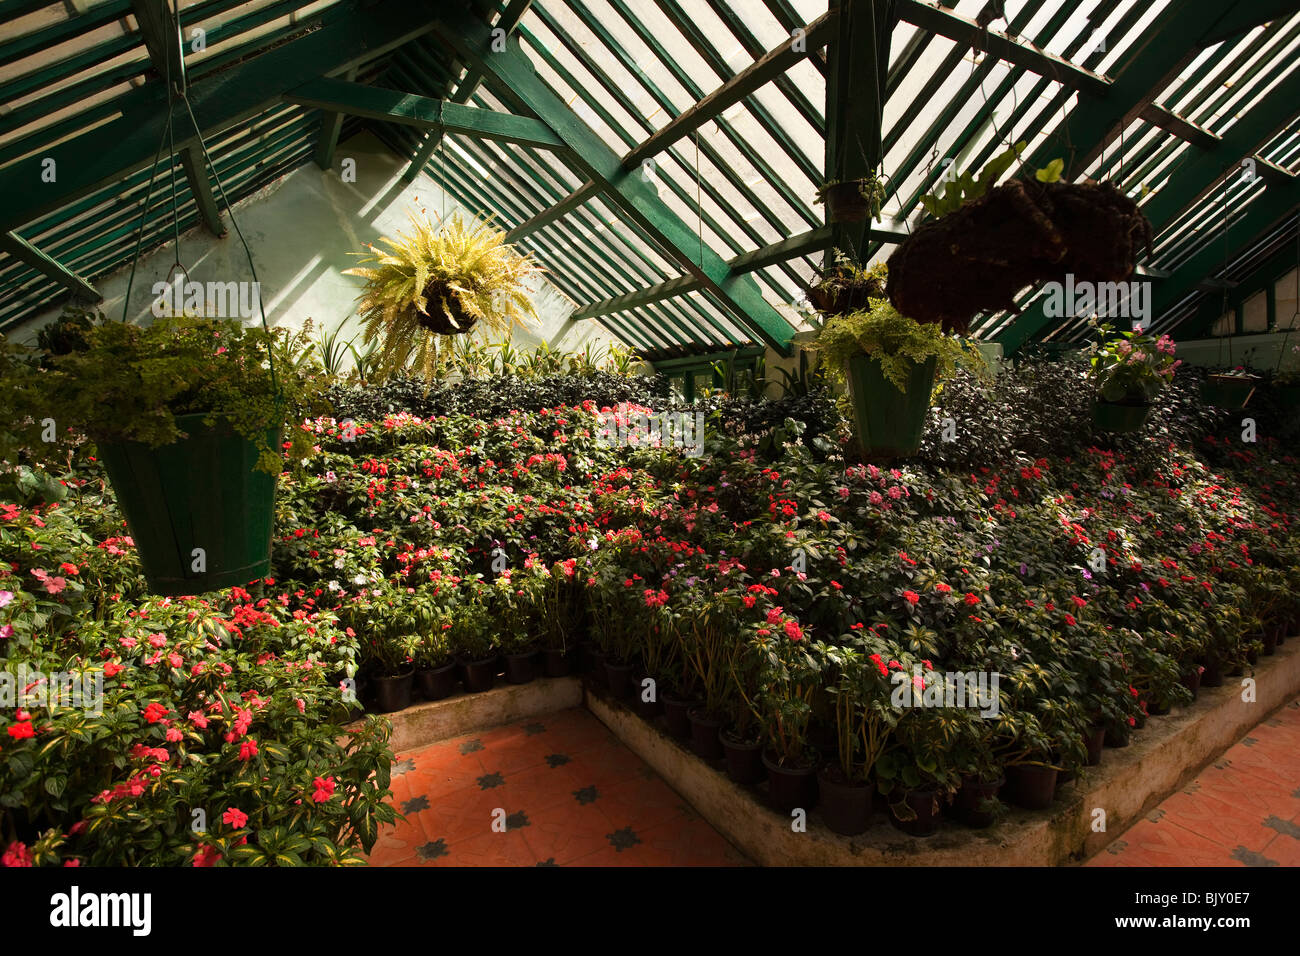 India, Tamil Nadu, Udhagamandalam (Ooty), Botanical Gardens, greenhouse, floral display of busy lizzies Stock Photo